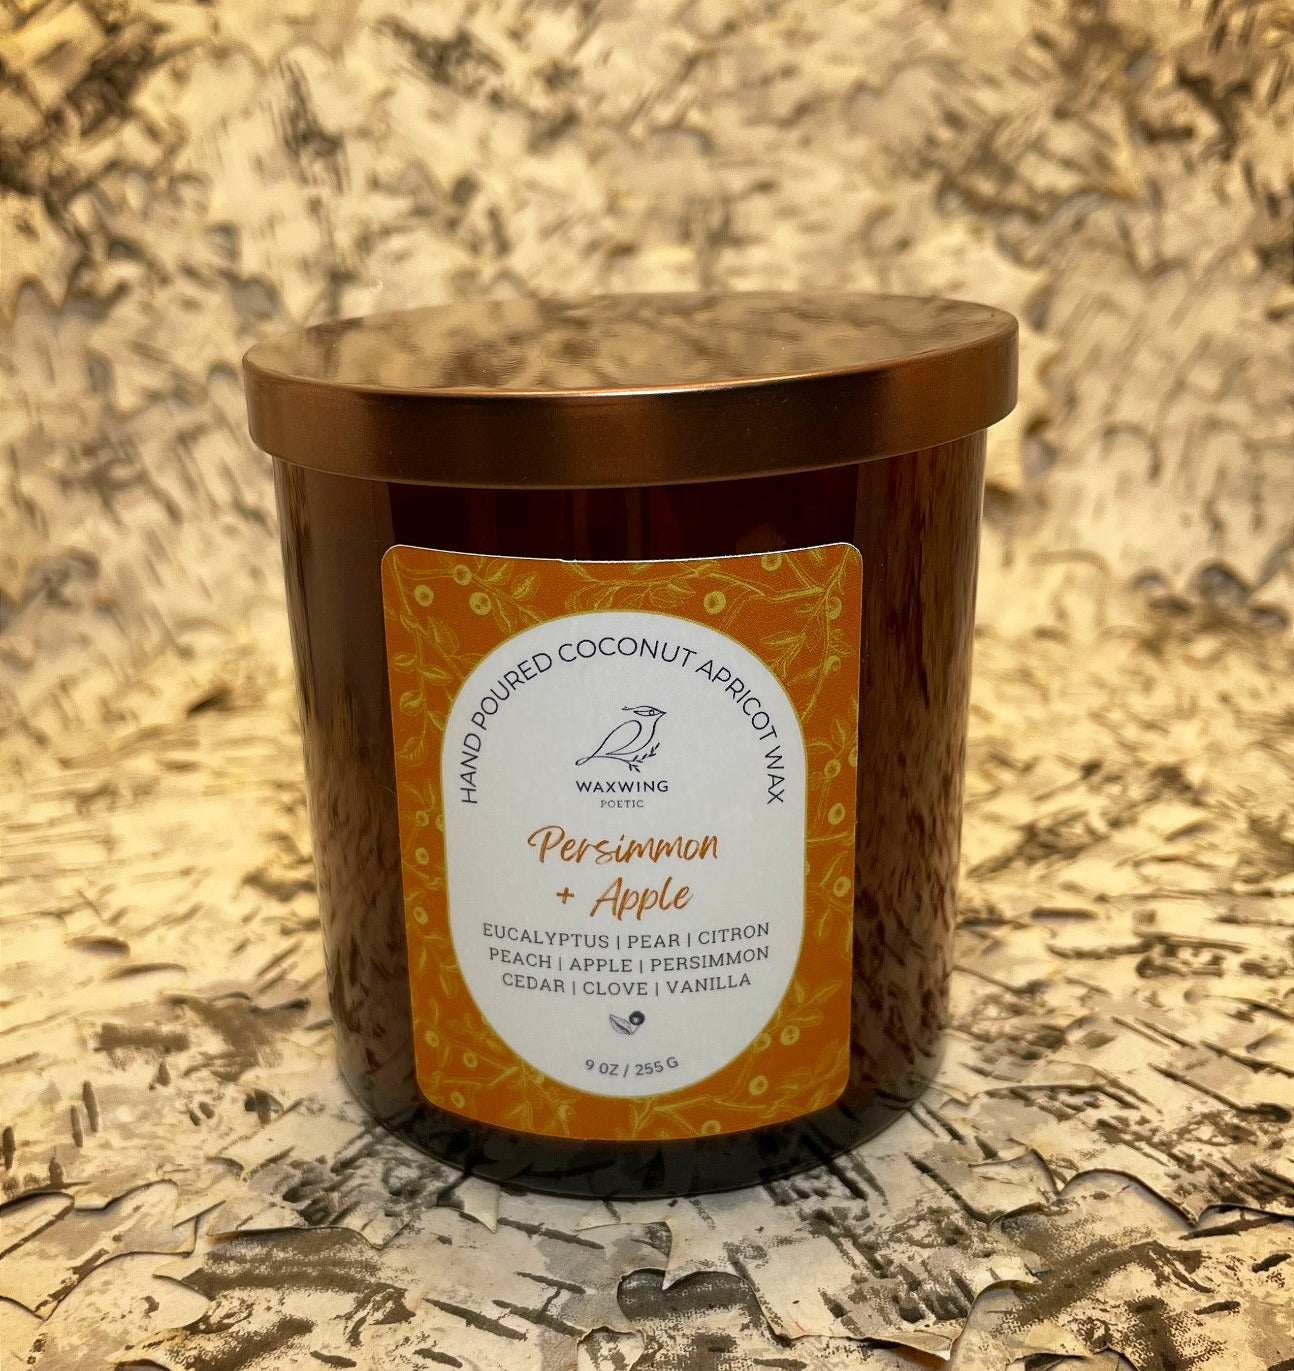 Persimmon + Apple | Coconut Apricot Wax Candle